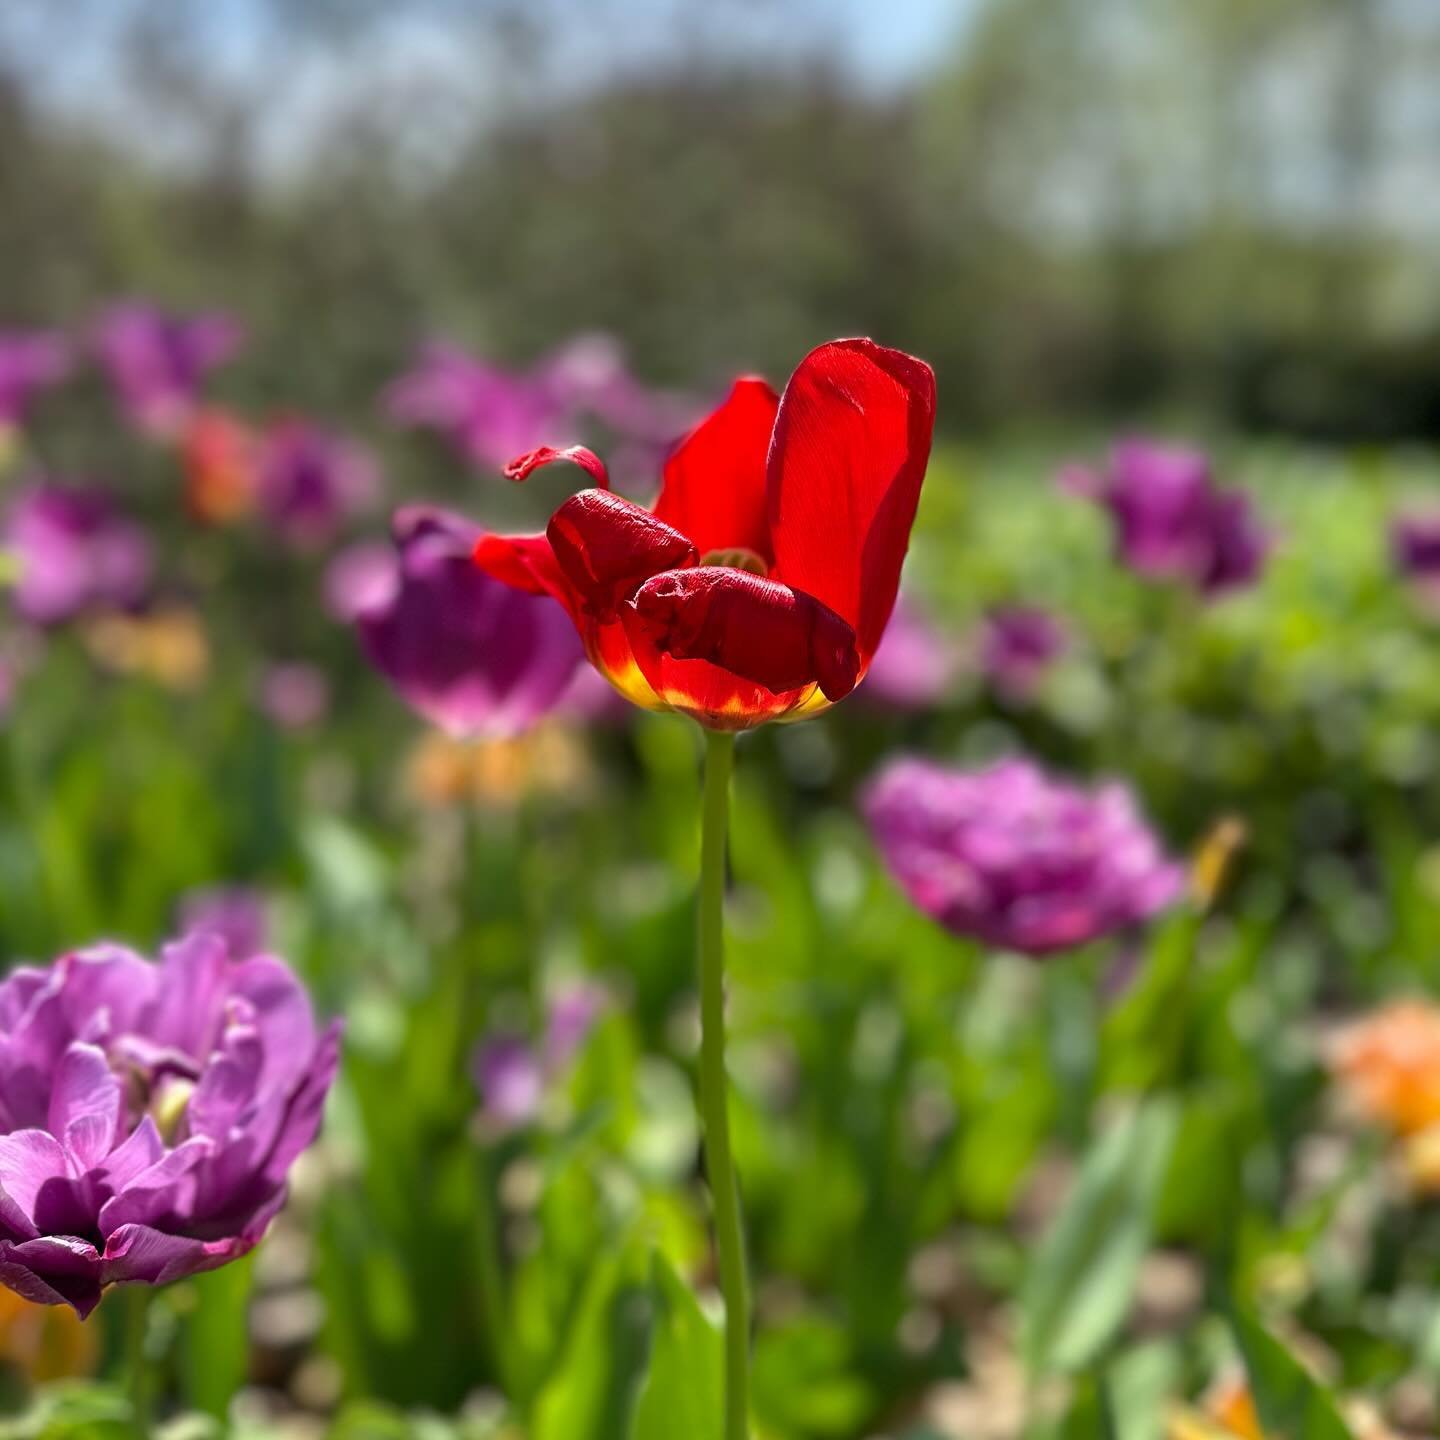 The weather is starting to be PERFECT for afternoon walks around Franklin Park Conservatory 🌷🌸 #thejacqueline #franklinparkconservatory #botanicalgarden #flowerstagram #afternoonwalk #thingstodoincolumbus #springtime